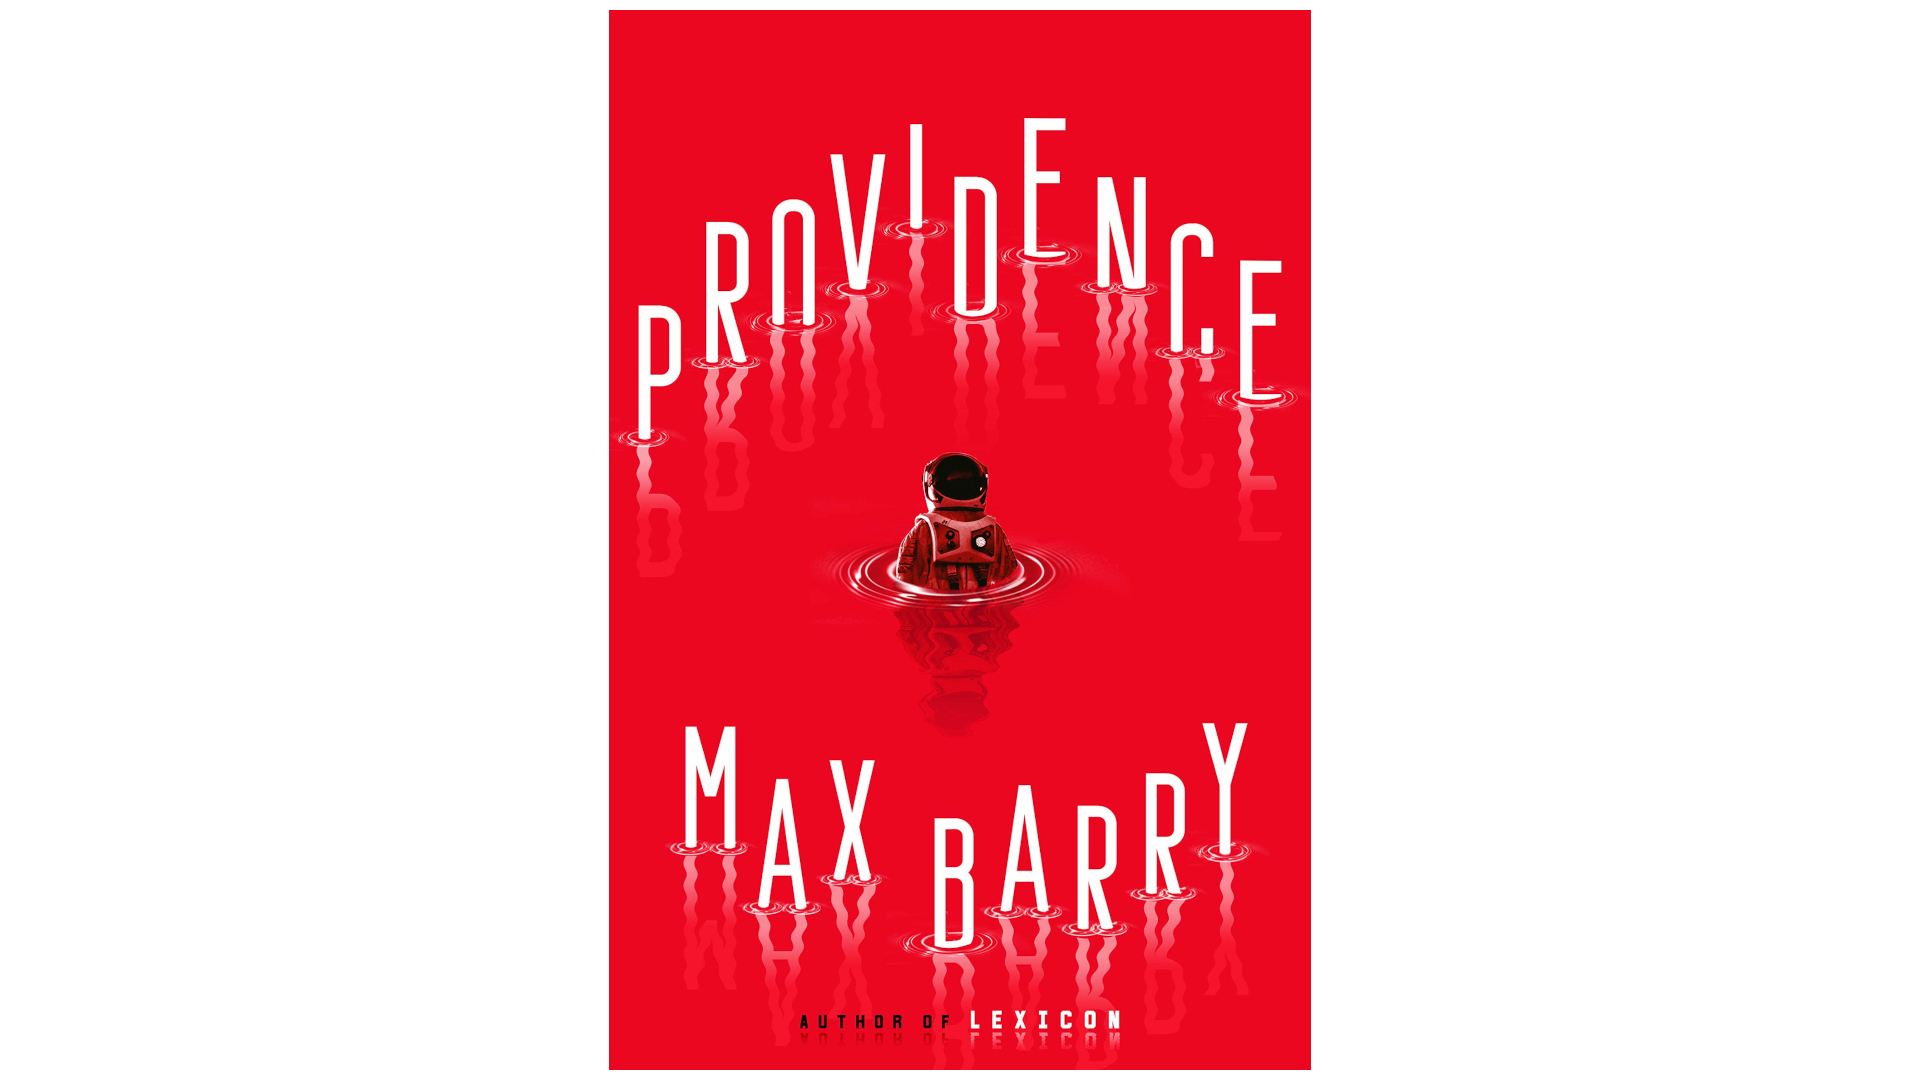 “Providence” by Max Berry (G. P. Putnam’s Sons, 2020)